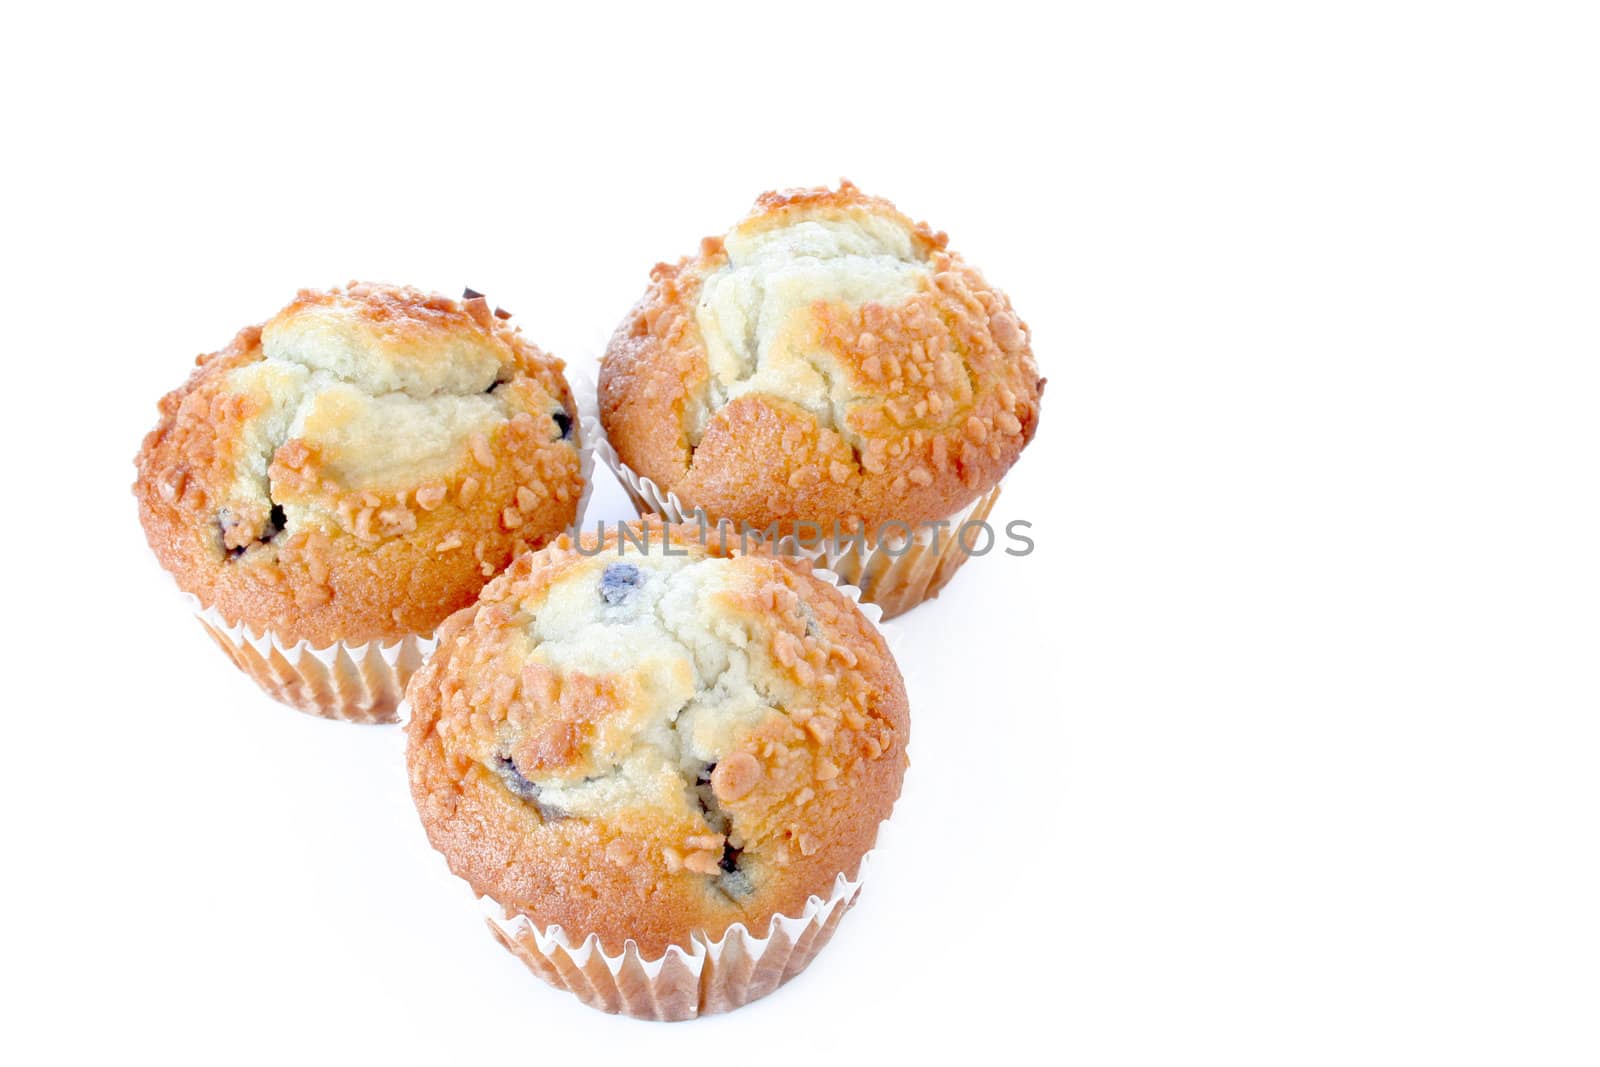 Blueberry muffins isolated on a white background. Copy space available.